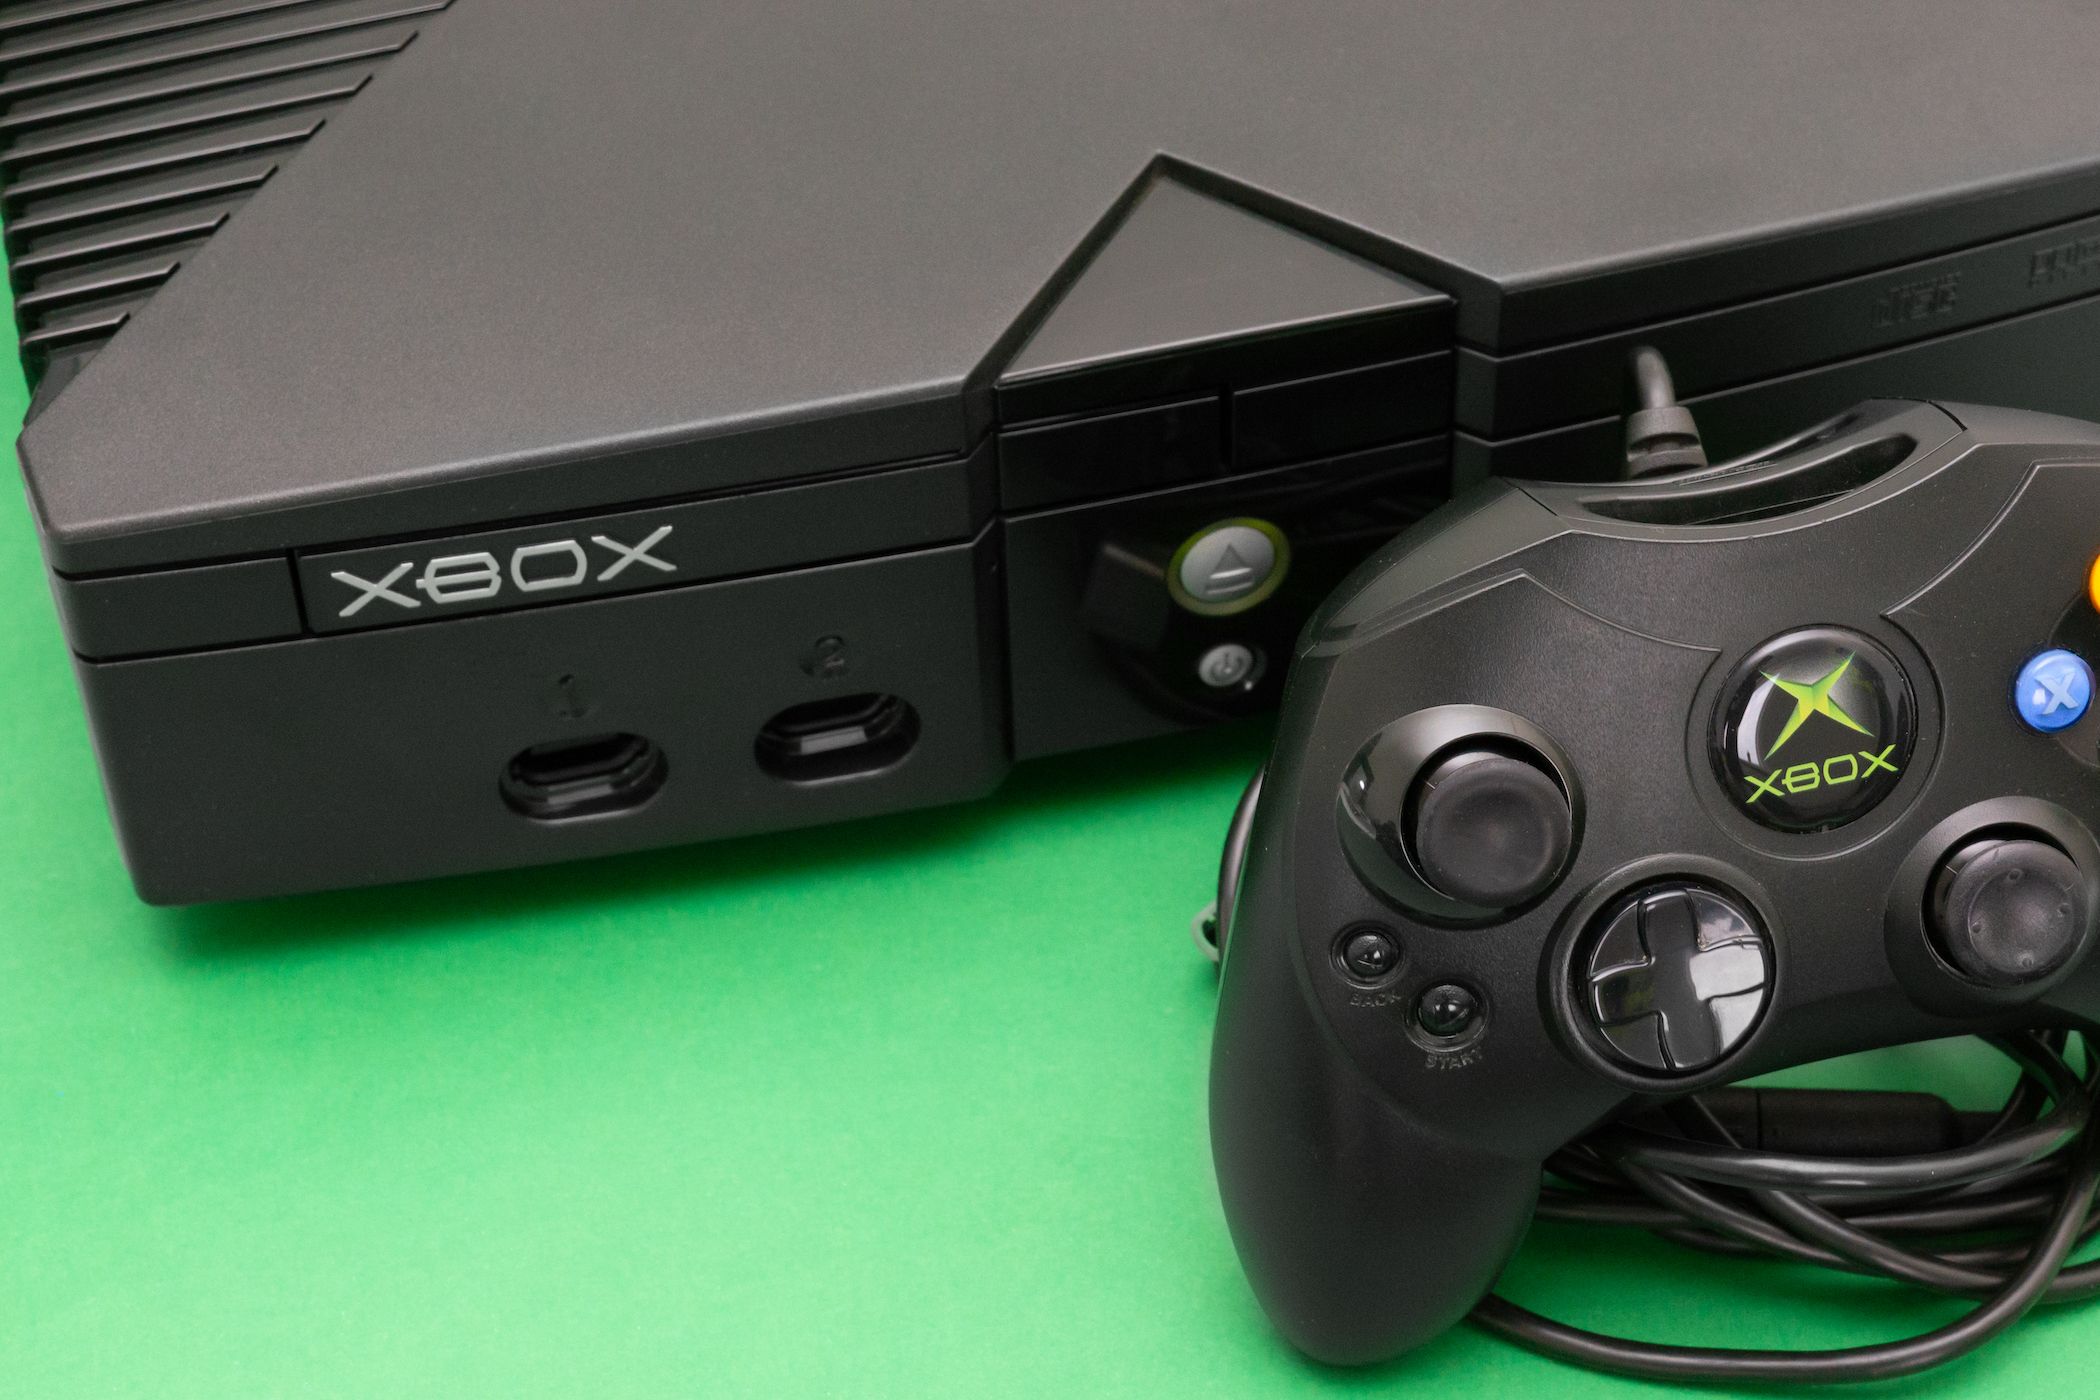 Microsoft’s original Xbox console powered on, on a green surface, and with a Controller S sitting in-front.